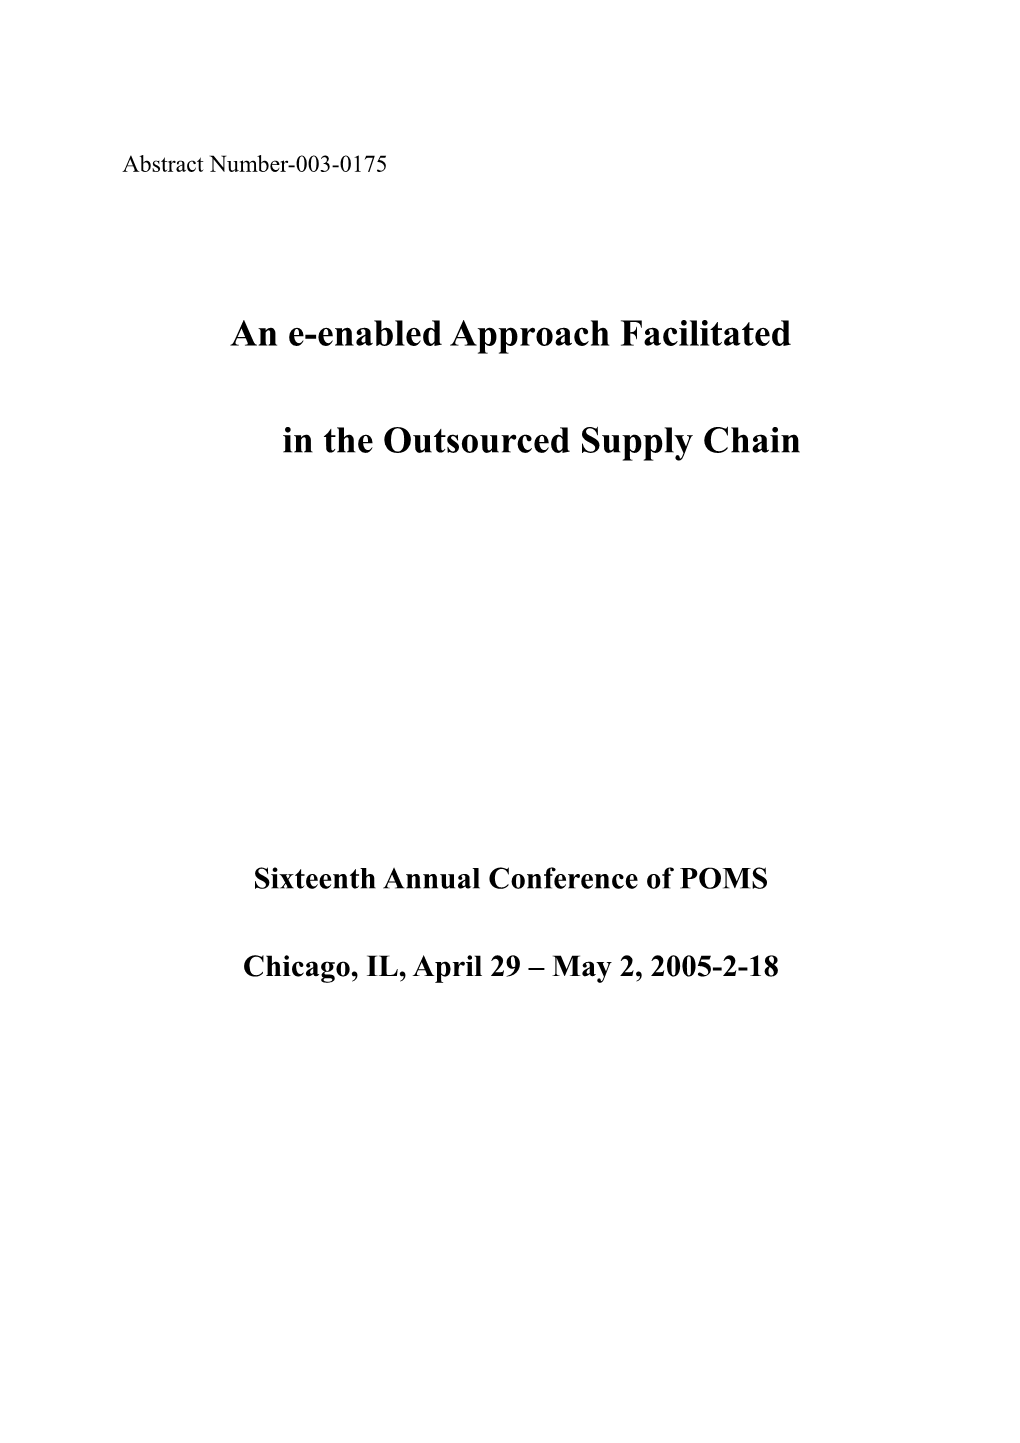 An E-Enabled Approach Facilitated in the Supply Chain Development